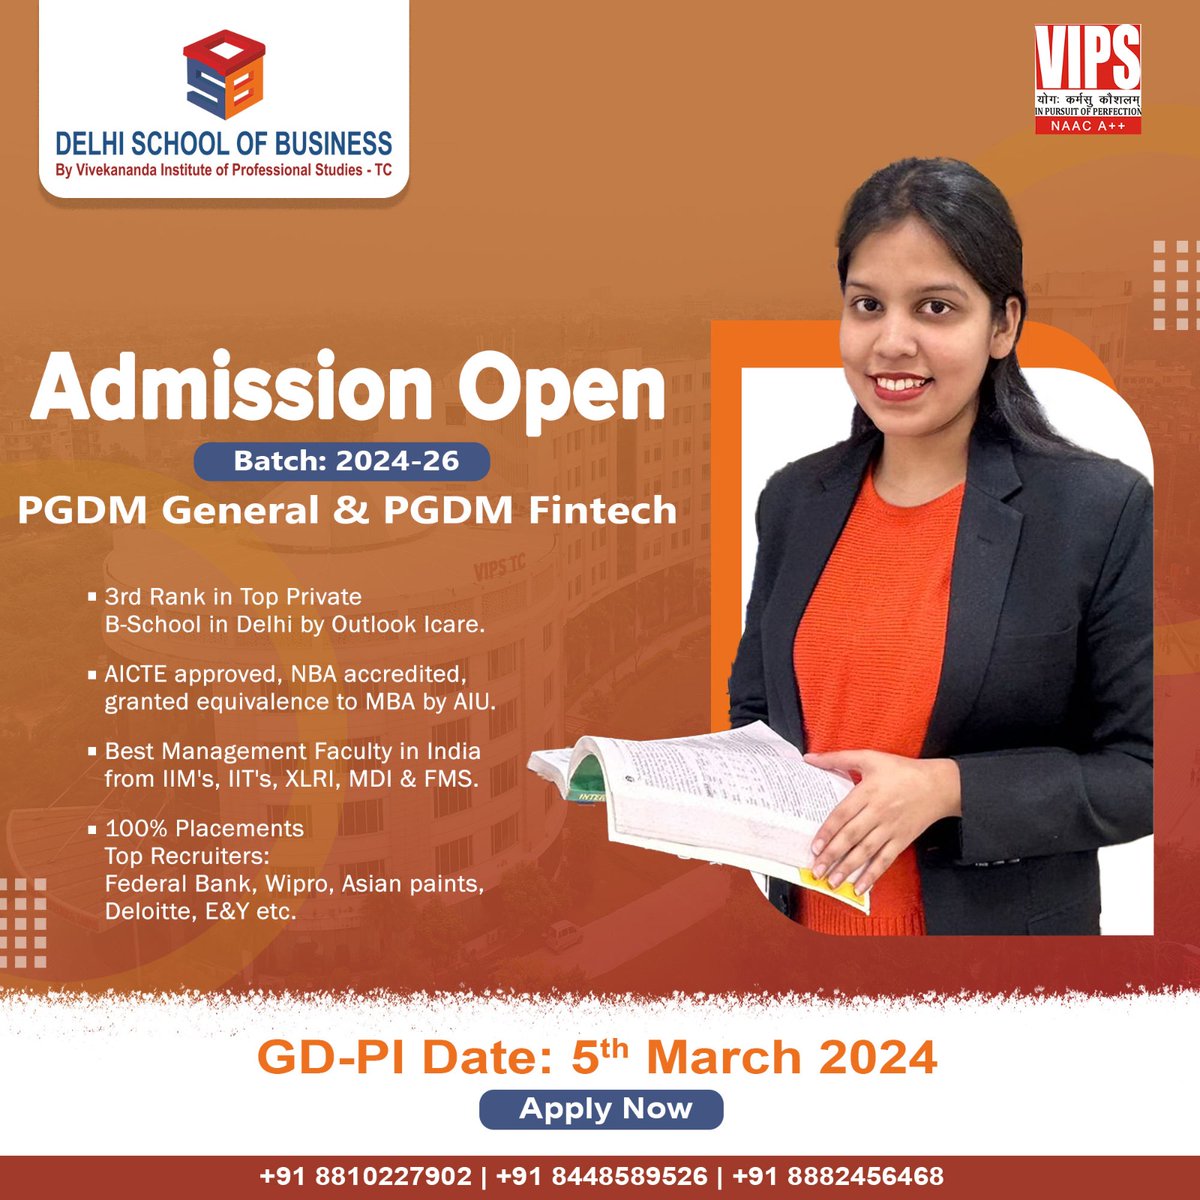 Admissions open at the top B-school in North India! #GD-PI event scheduled for March 5, at DSB (VIPS)! Secure your spot now! Link in bio. Join a community that embraces excellence and empowers you with hands-on skills. #DSBAdmissions #PGDMOpportunities #DSB2024